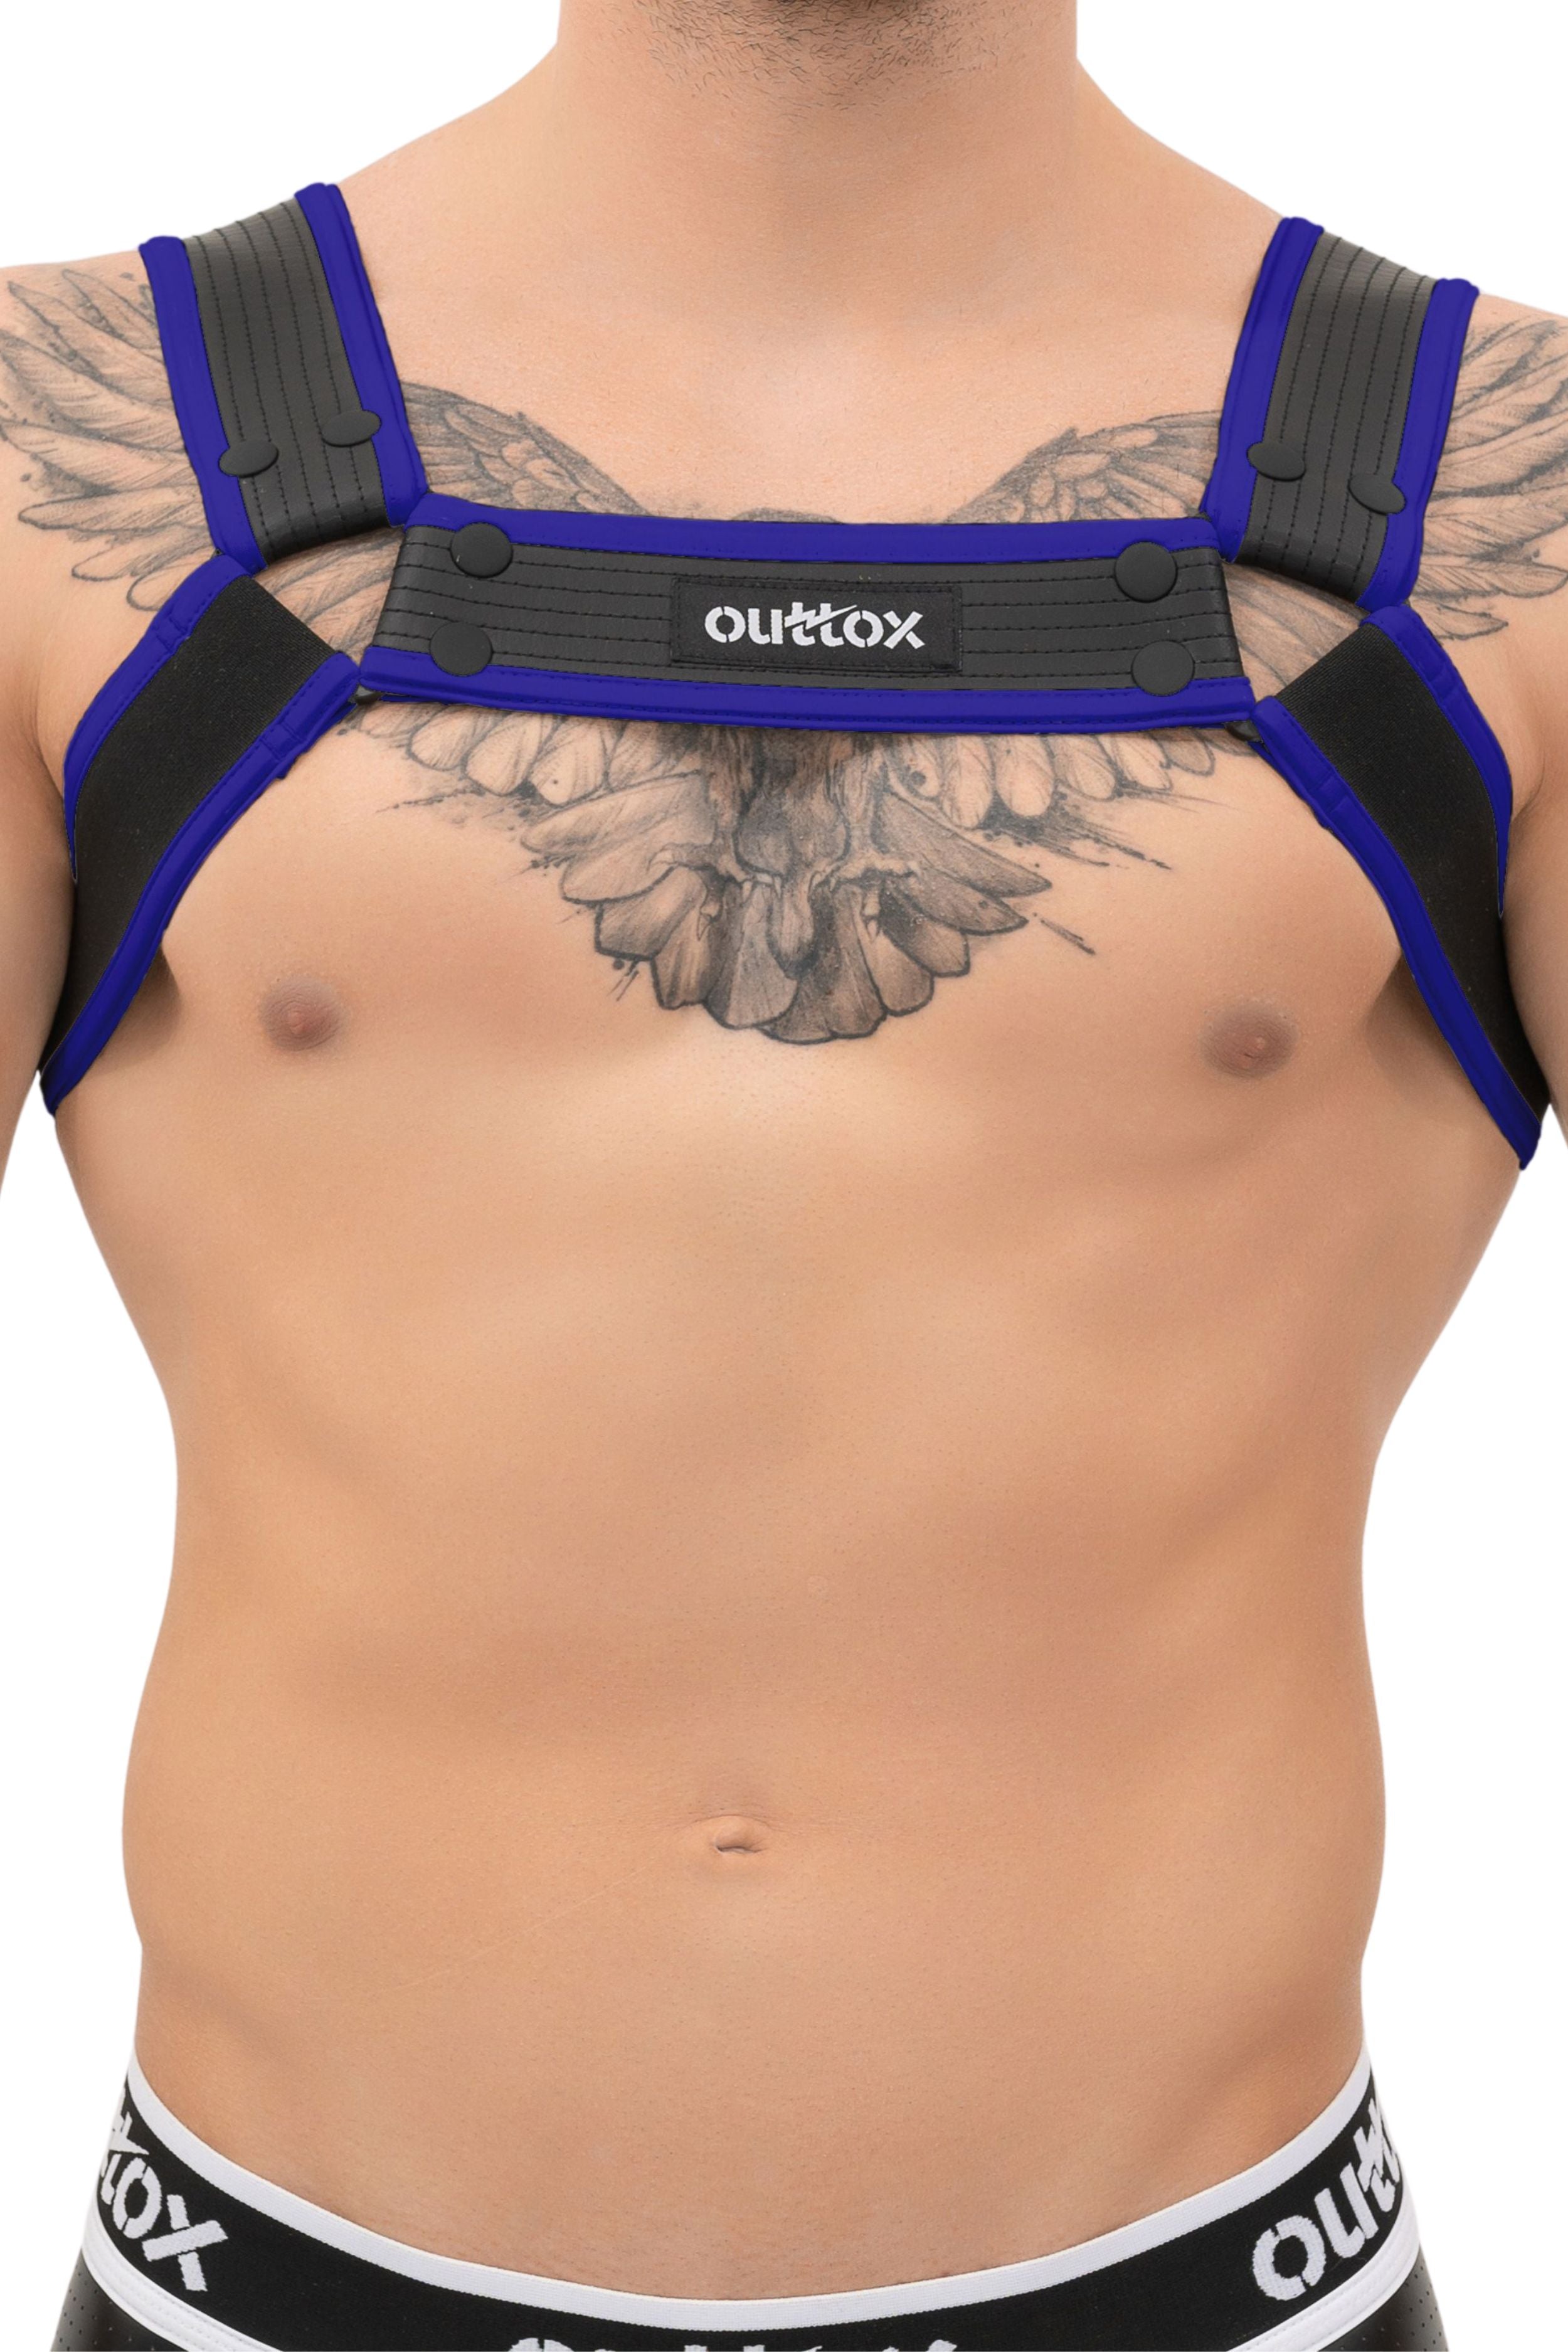 Outtox. Bulldog Harness with Snaps. Black+Blue &